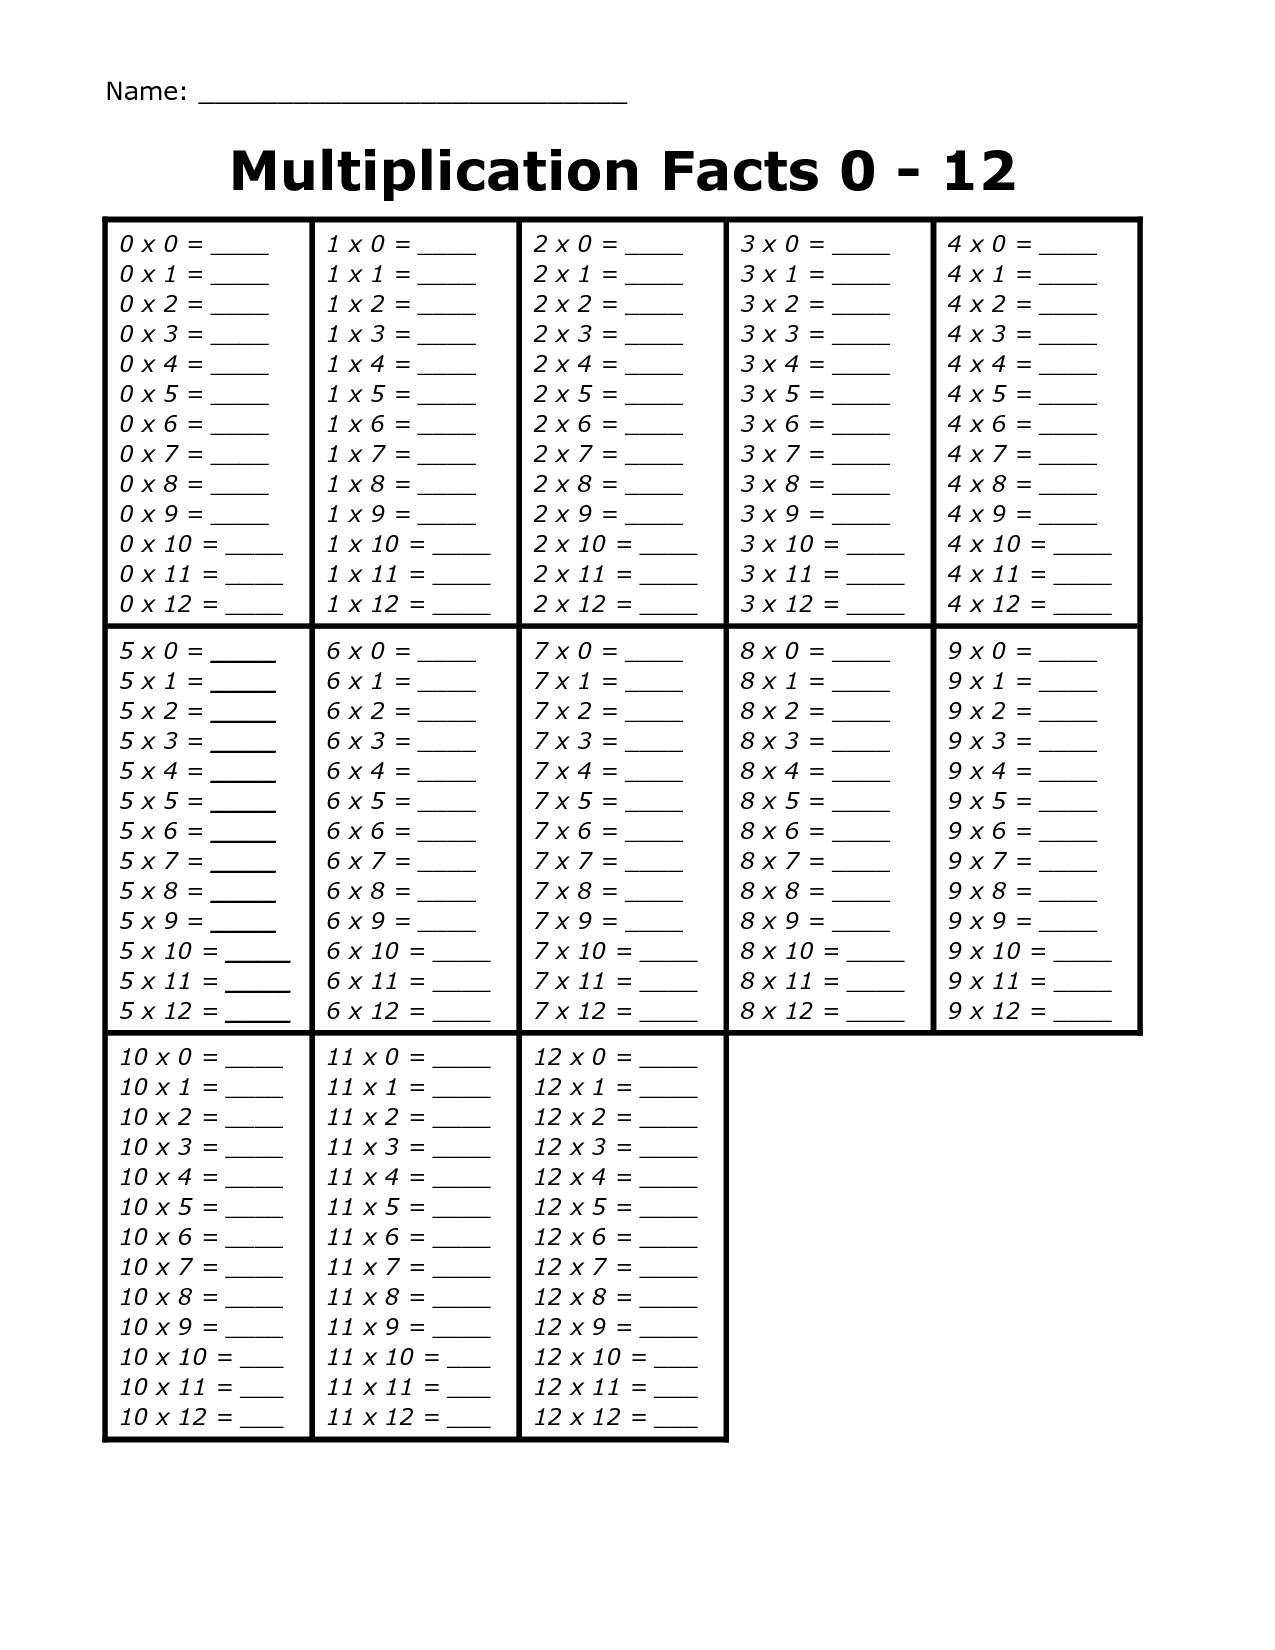 Printable Multiplication Facts 0 12 | Multiplication Facts with regard to Printable Multiplication Flash Cards 0-12